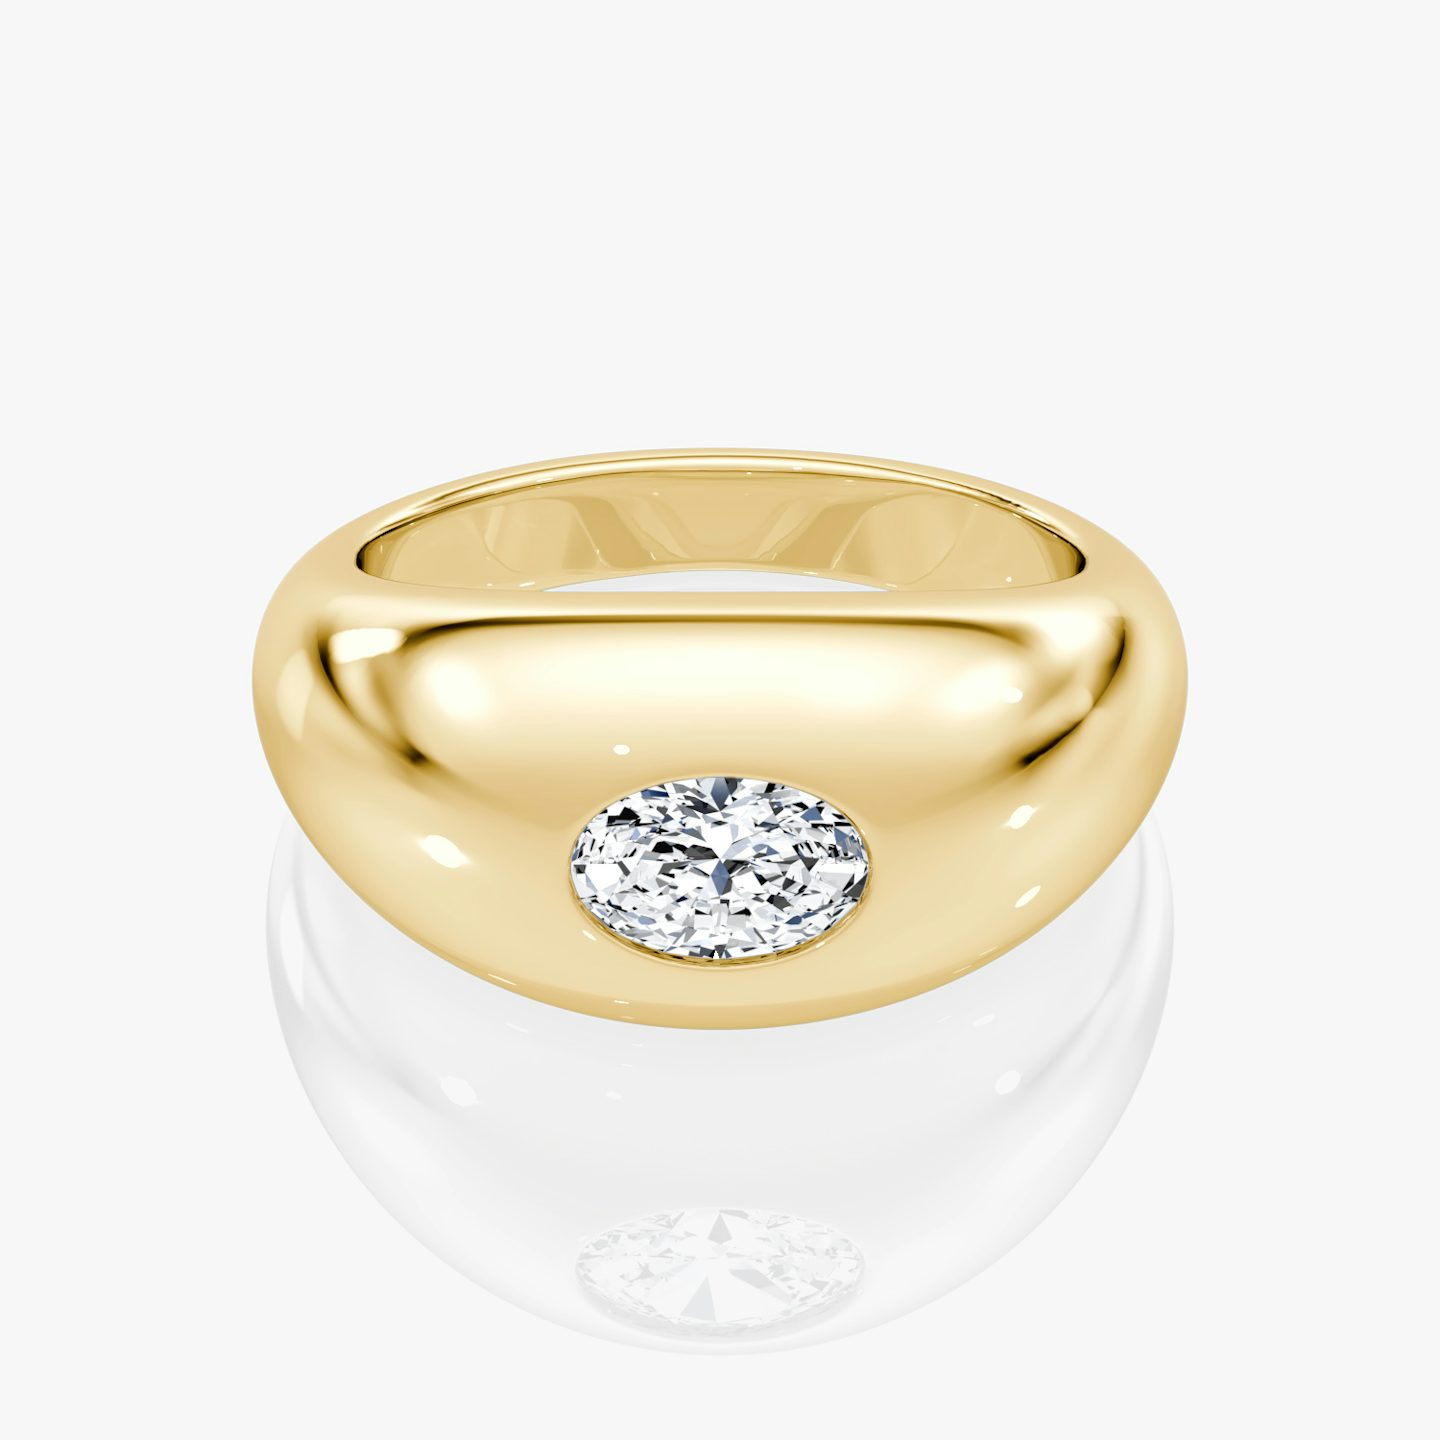 Bague Dome | Ovale | 14k | Or jaune 18 carats